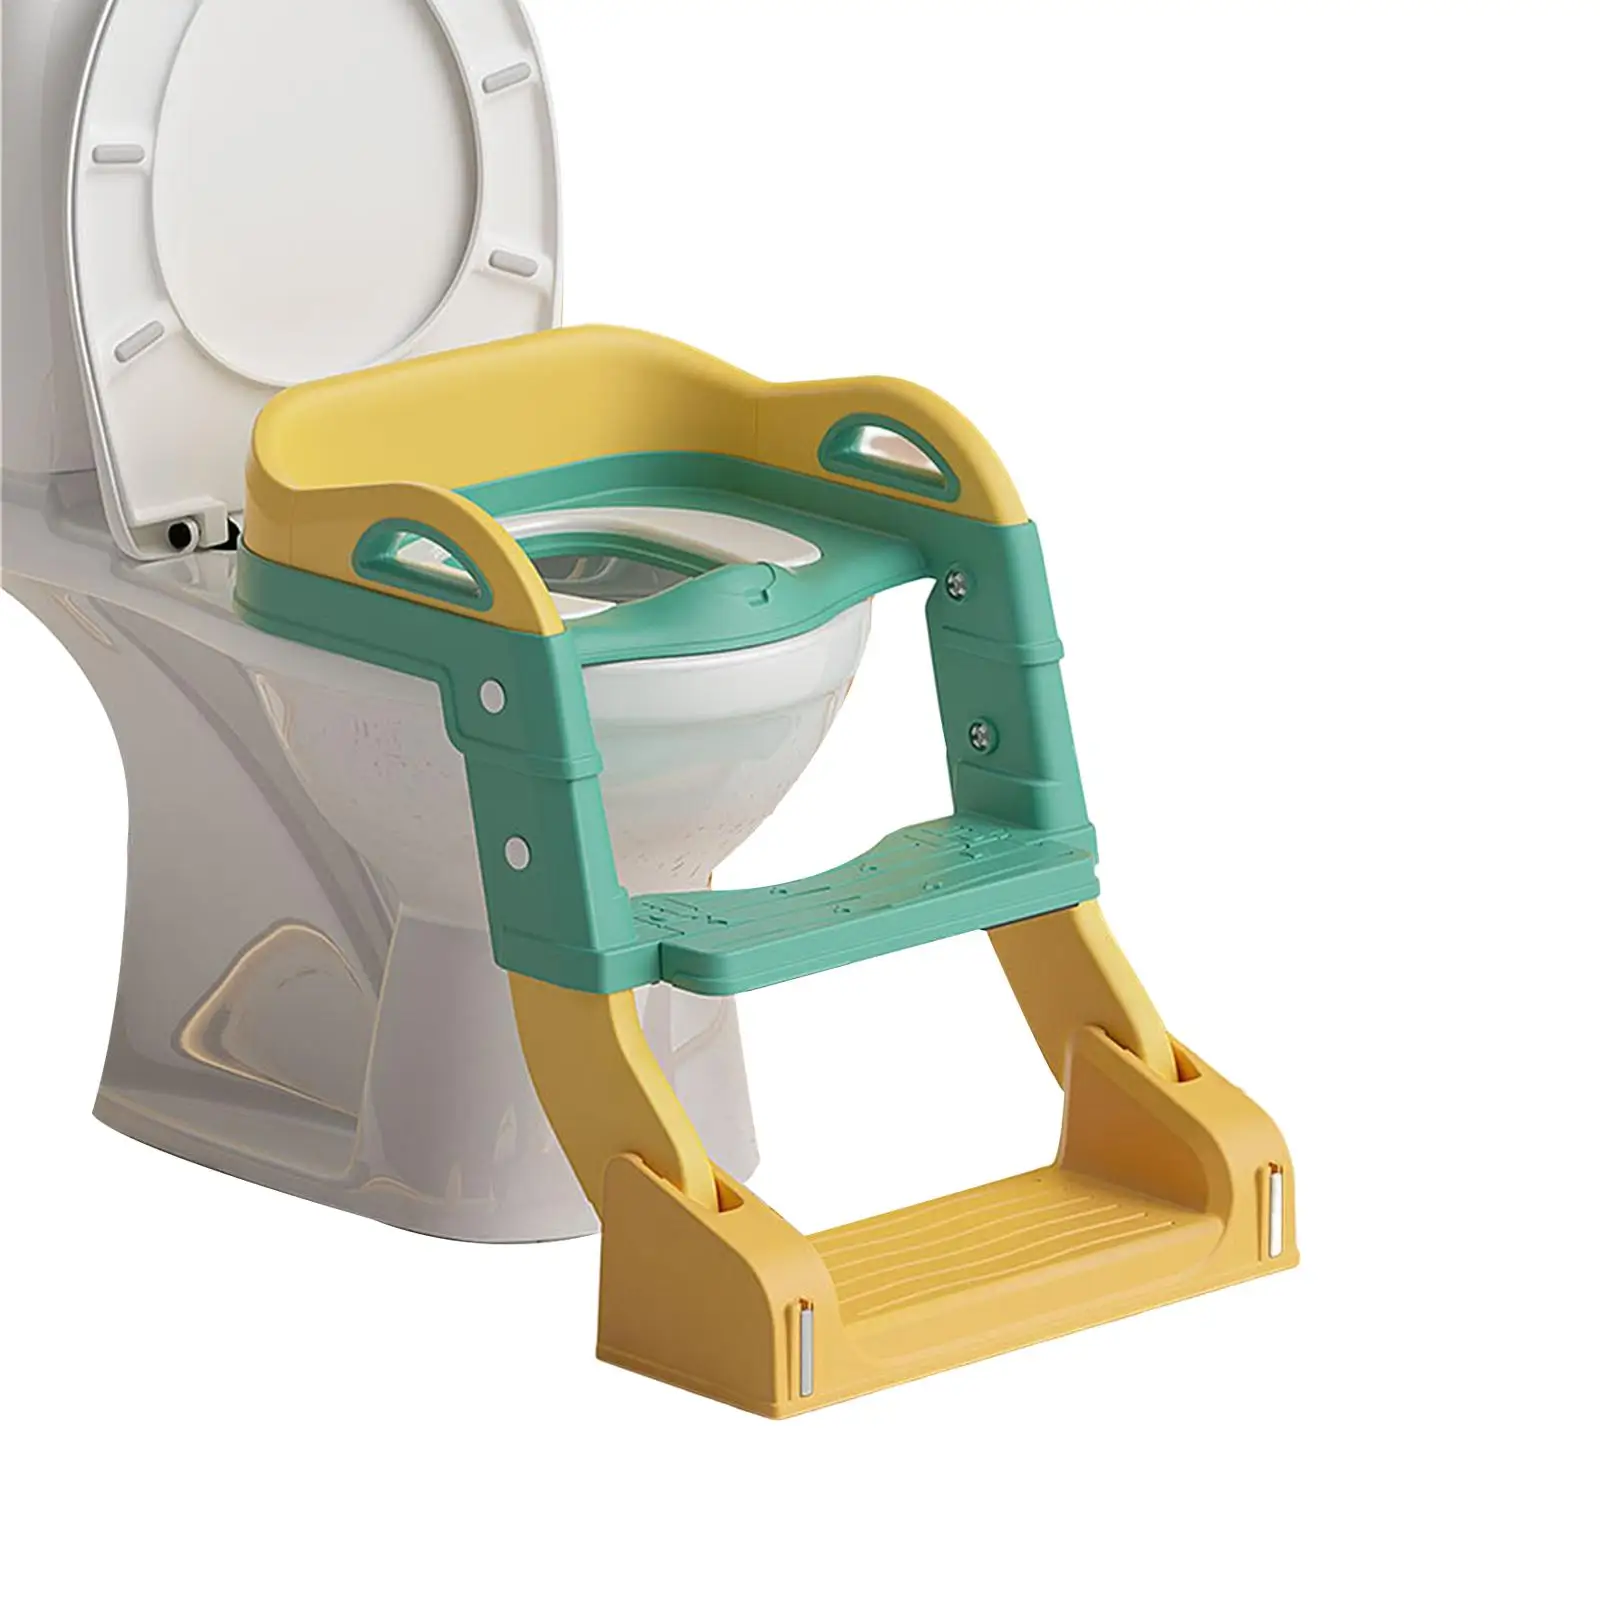 Kids Toilet Training Seat Step Stool Ladder Baby Infant Potty Soft Cushion Boy Girl Potty with Handle Child Toilet Trainer Seat